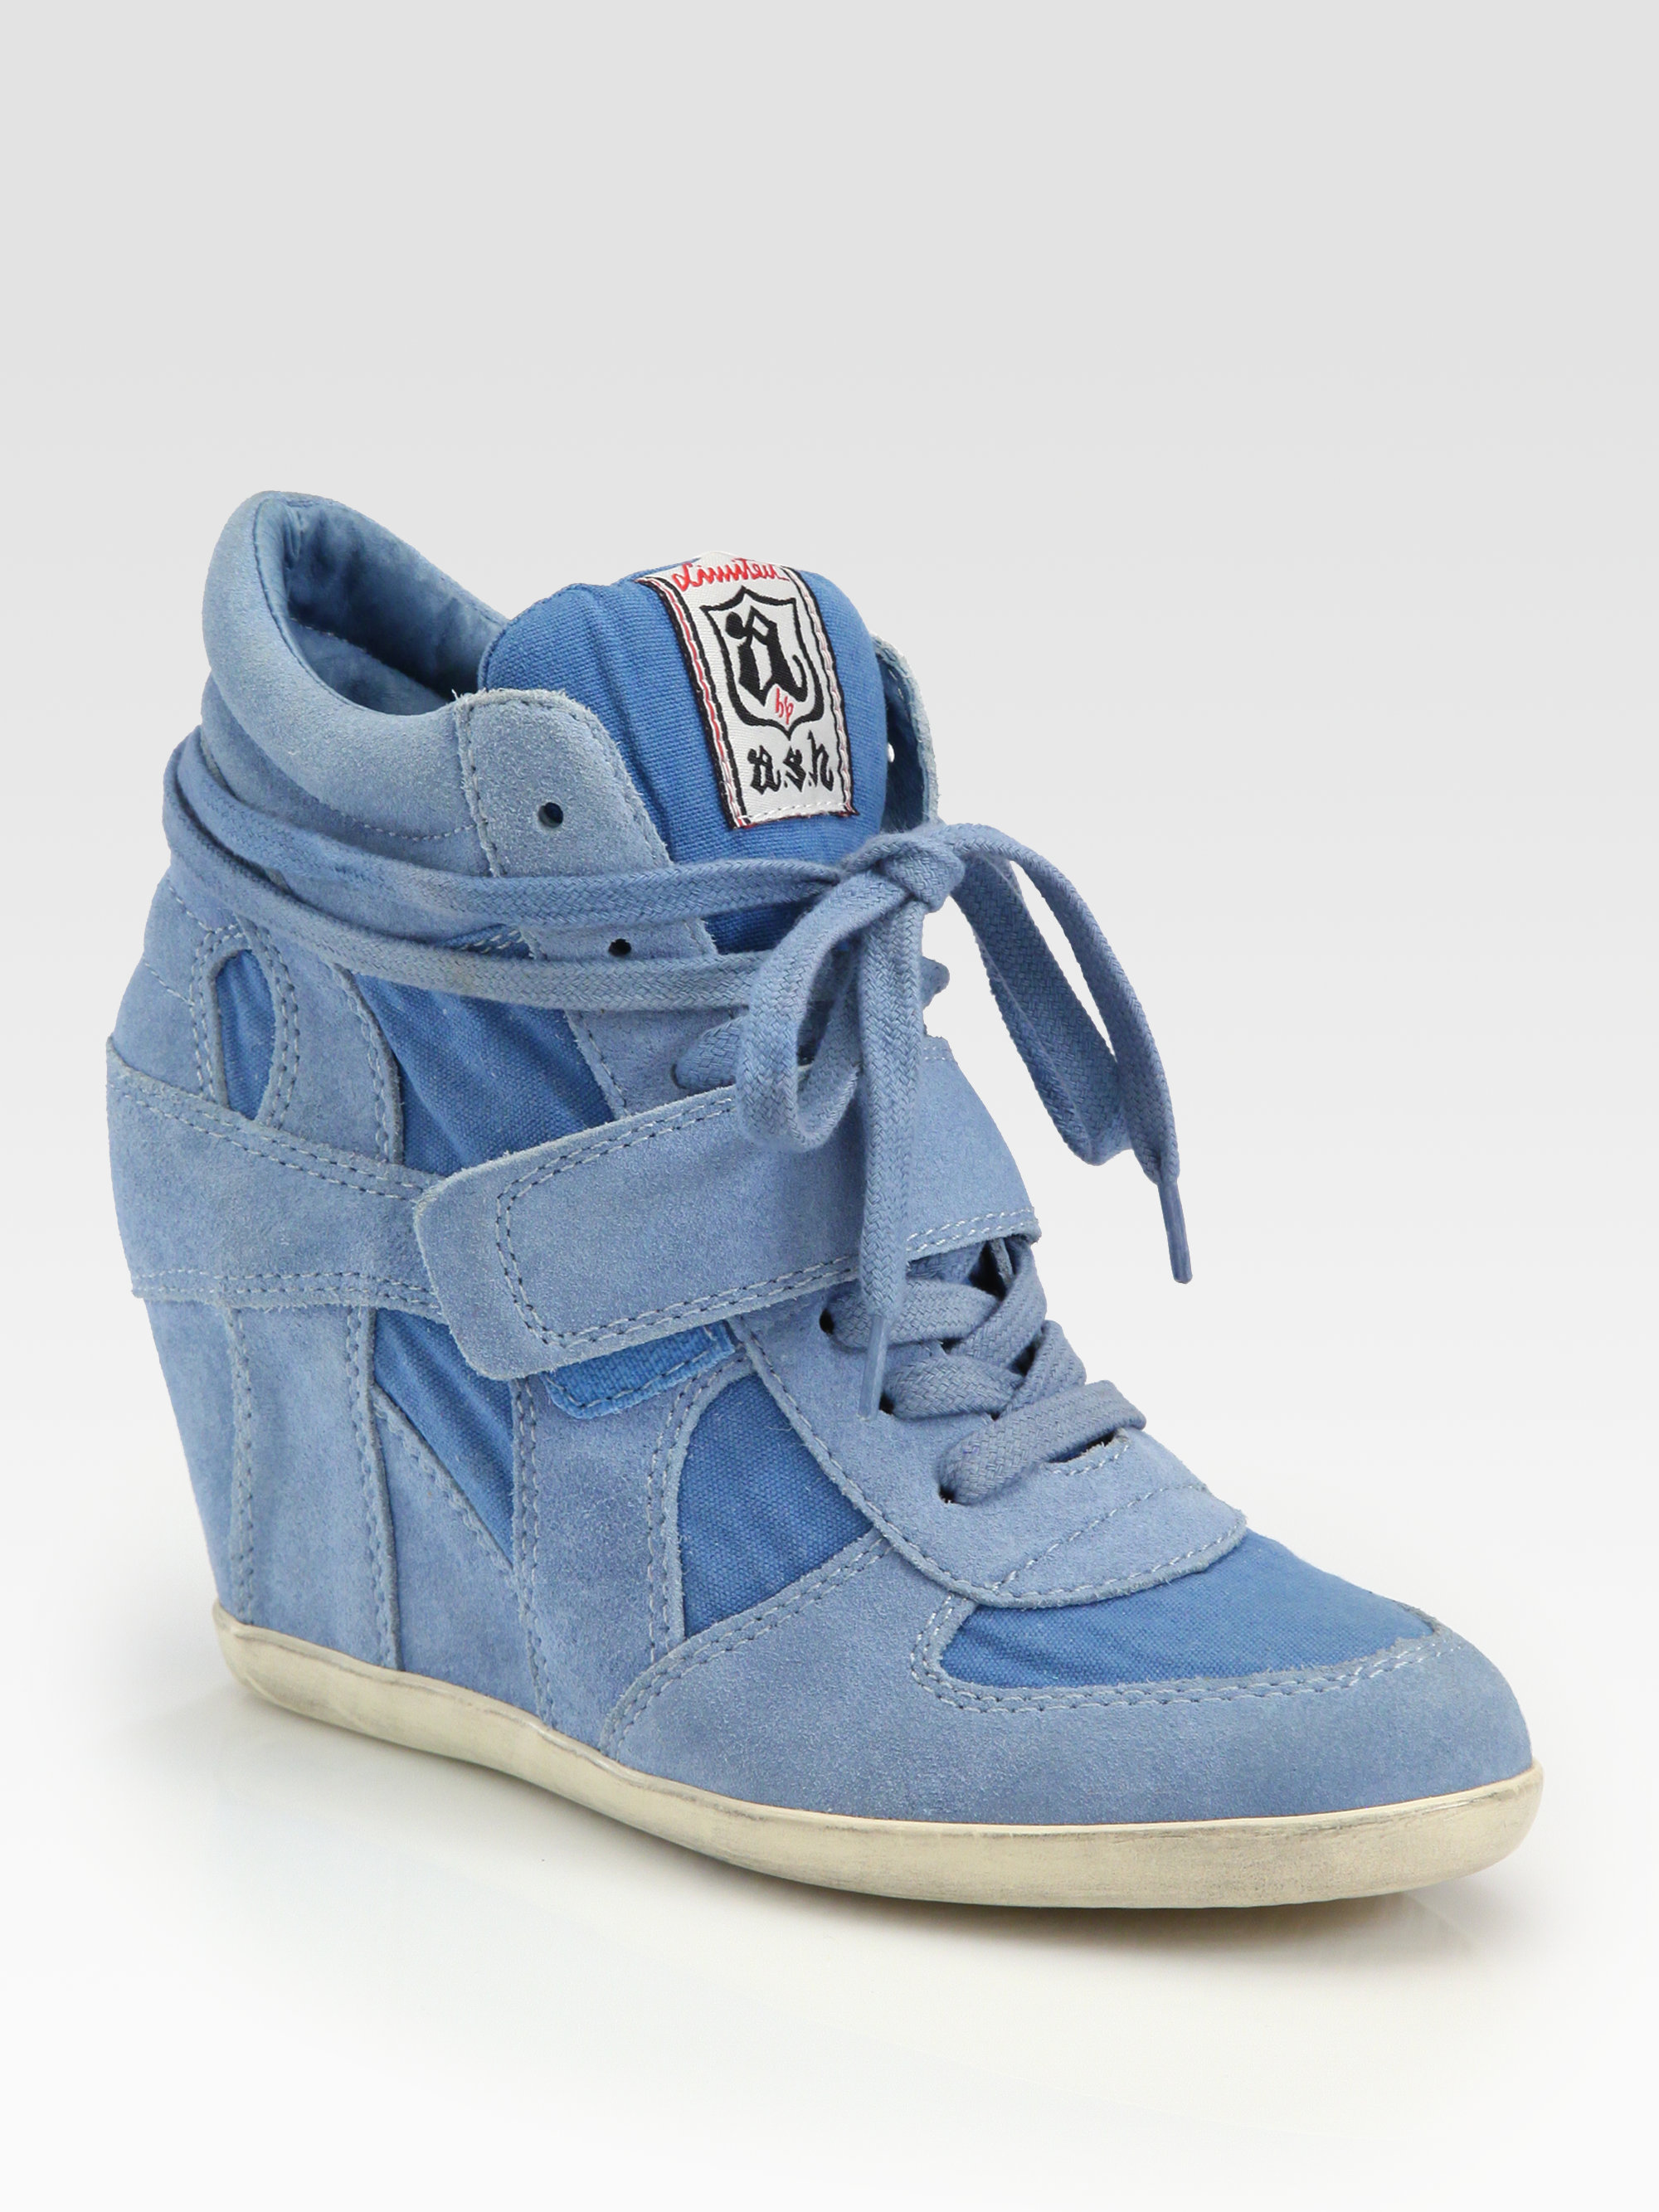 Ash Bowie Suede Wedge Sneakers in Blue | Lyst